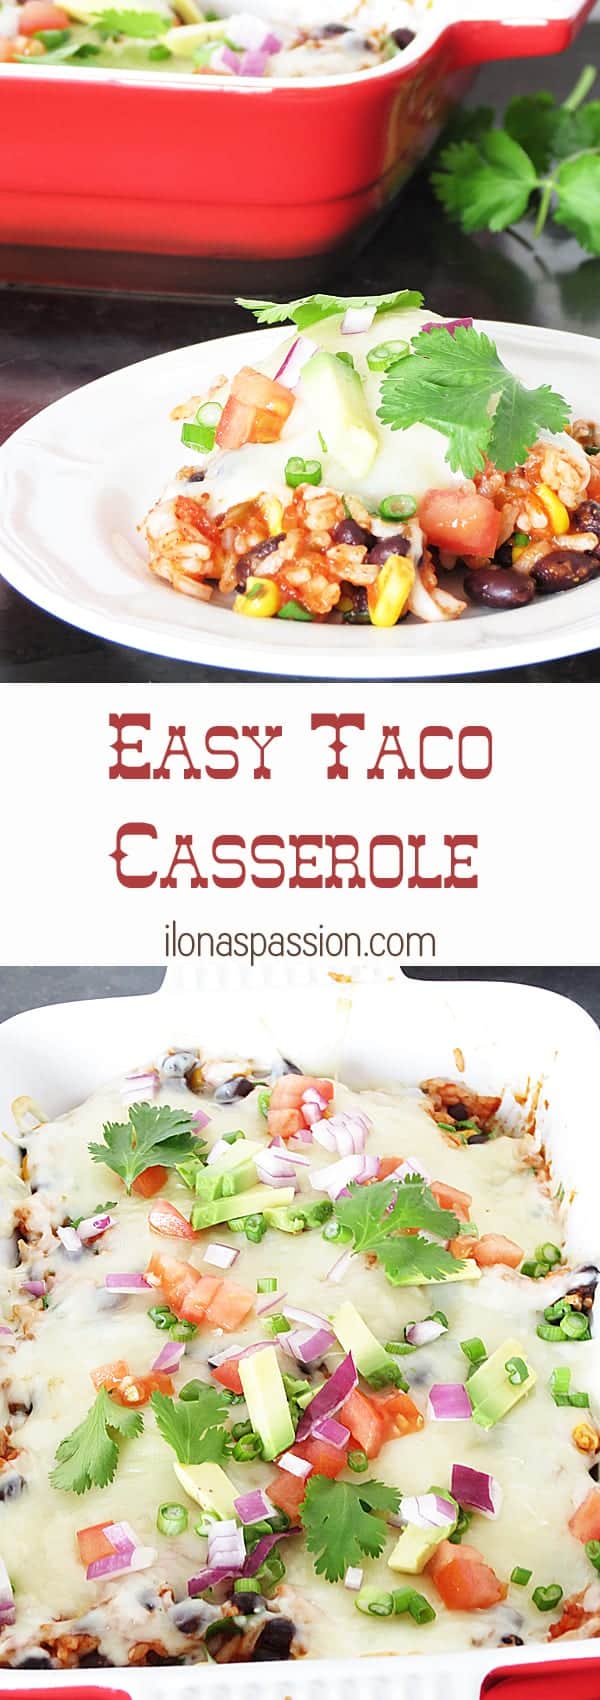 Easy Taco Casserole: meatless and delicious by ilonaspassion.com